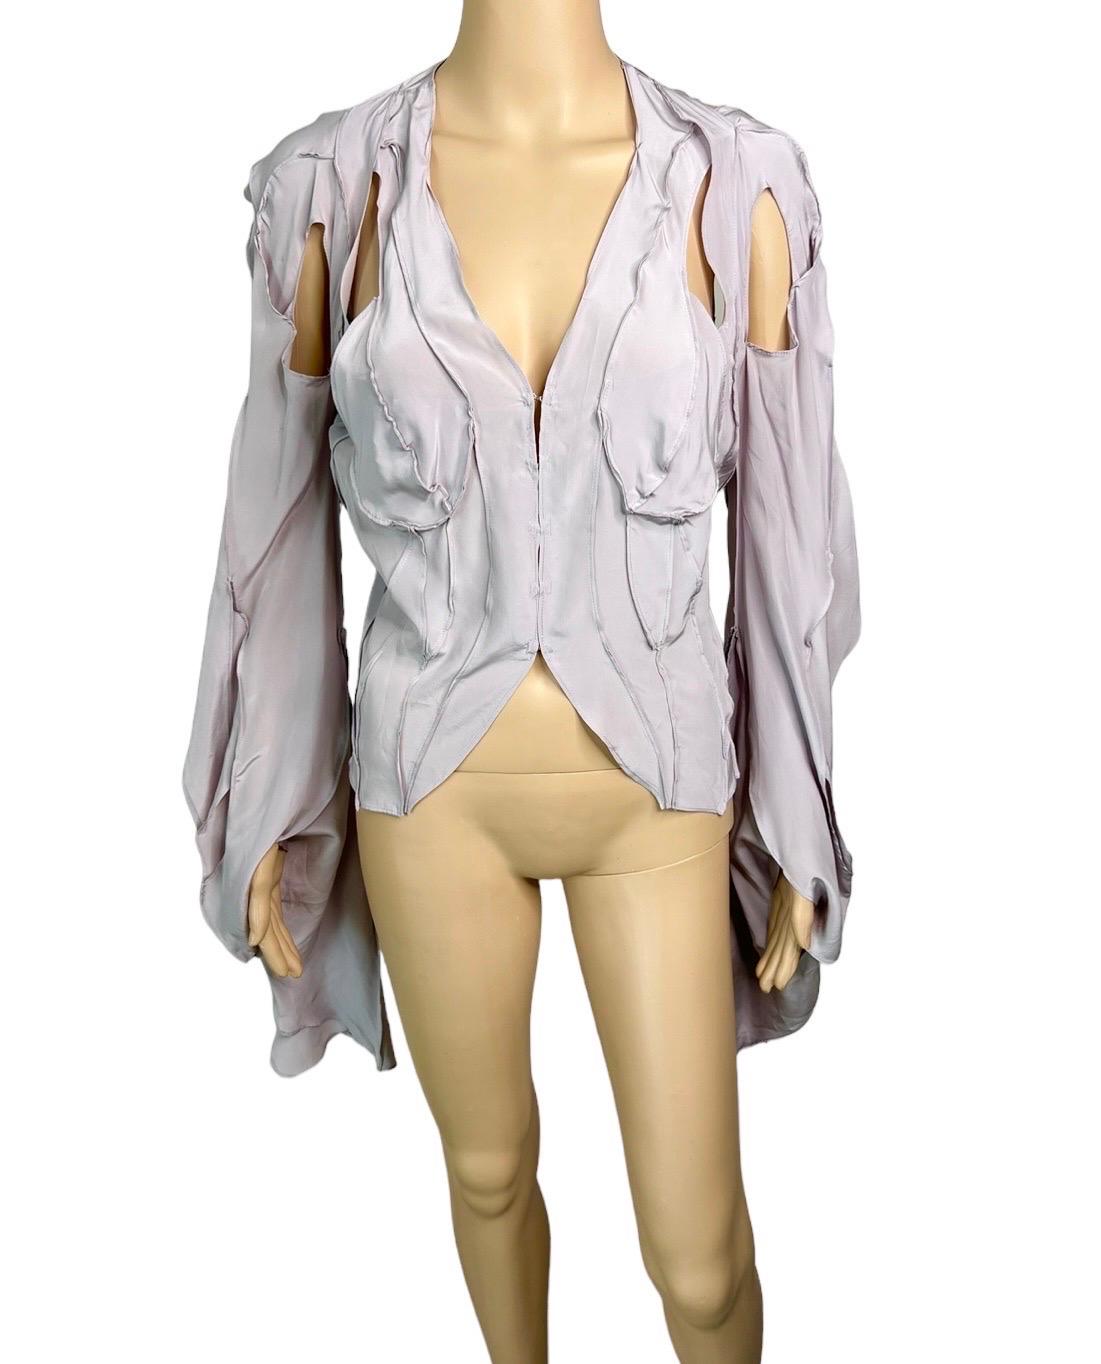 Women's Tom Ford for Yves Saint Laurent YSL S/S 2003 Runway Cutout Shirt Blouse Top For Sale